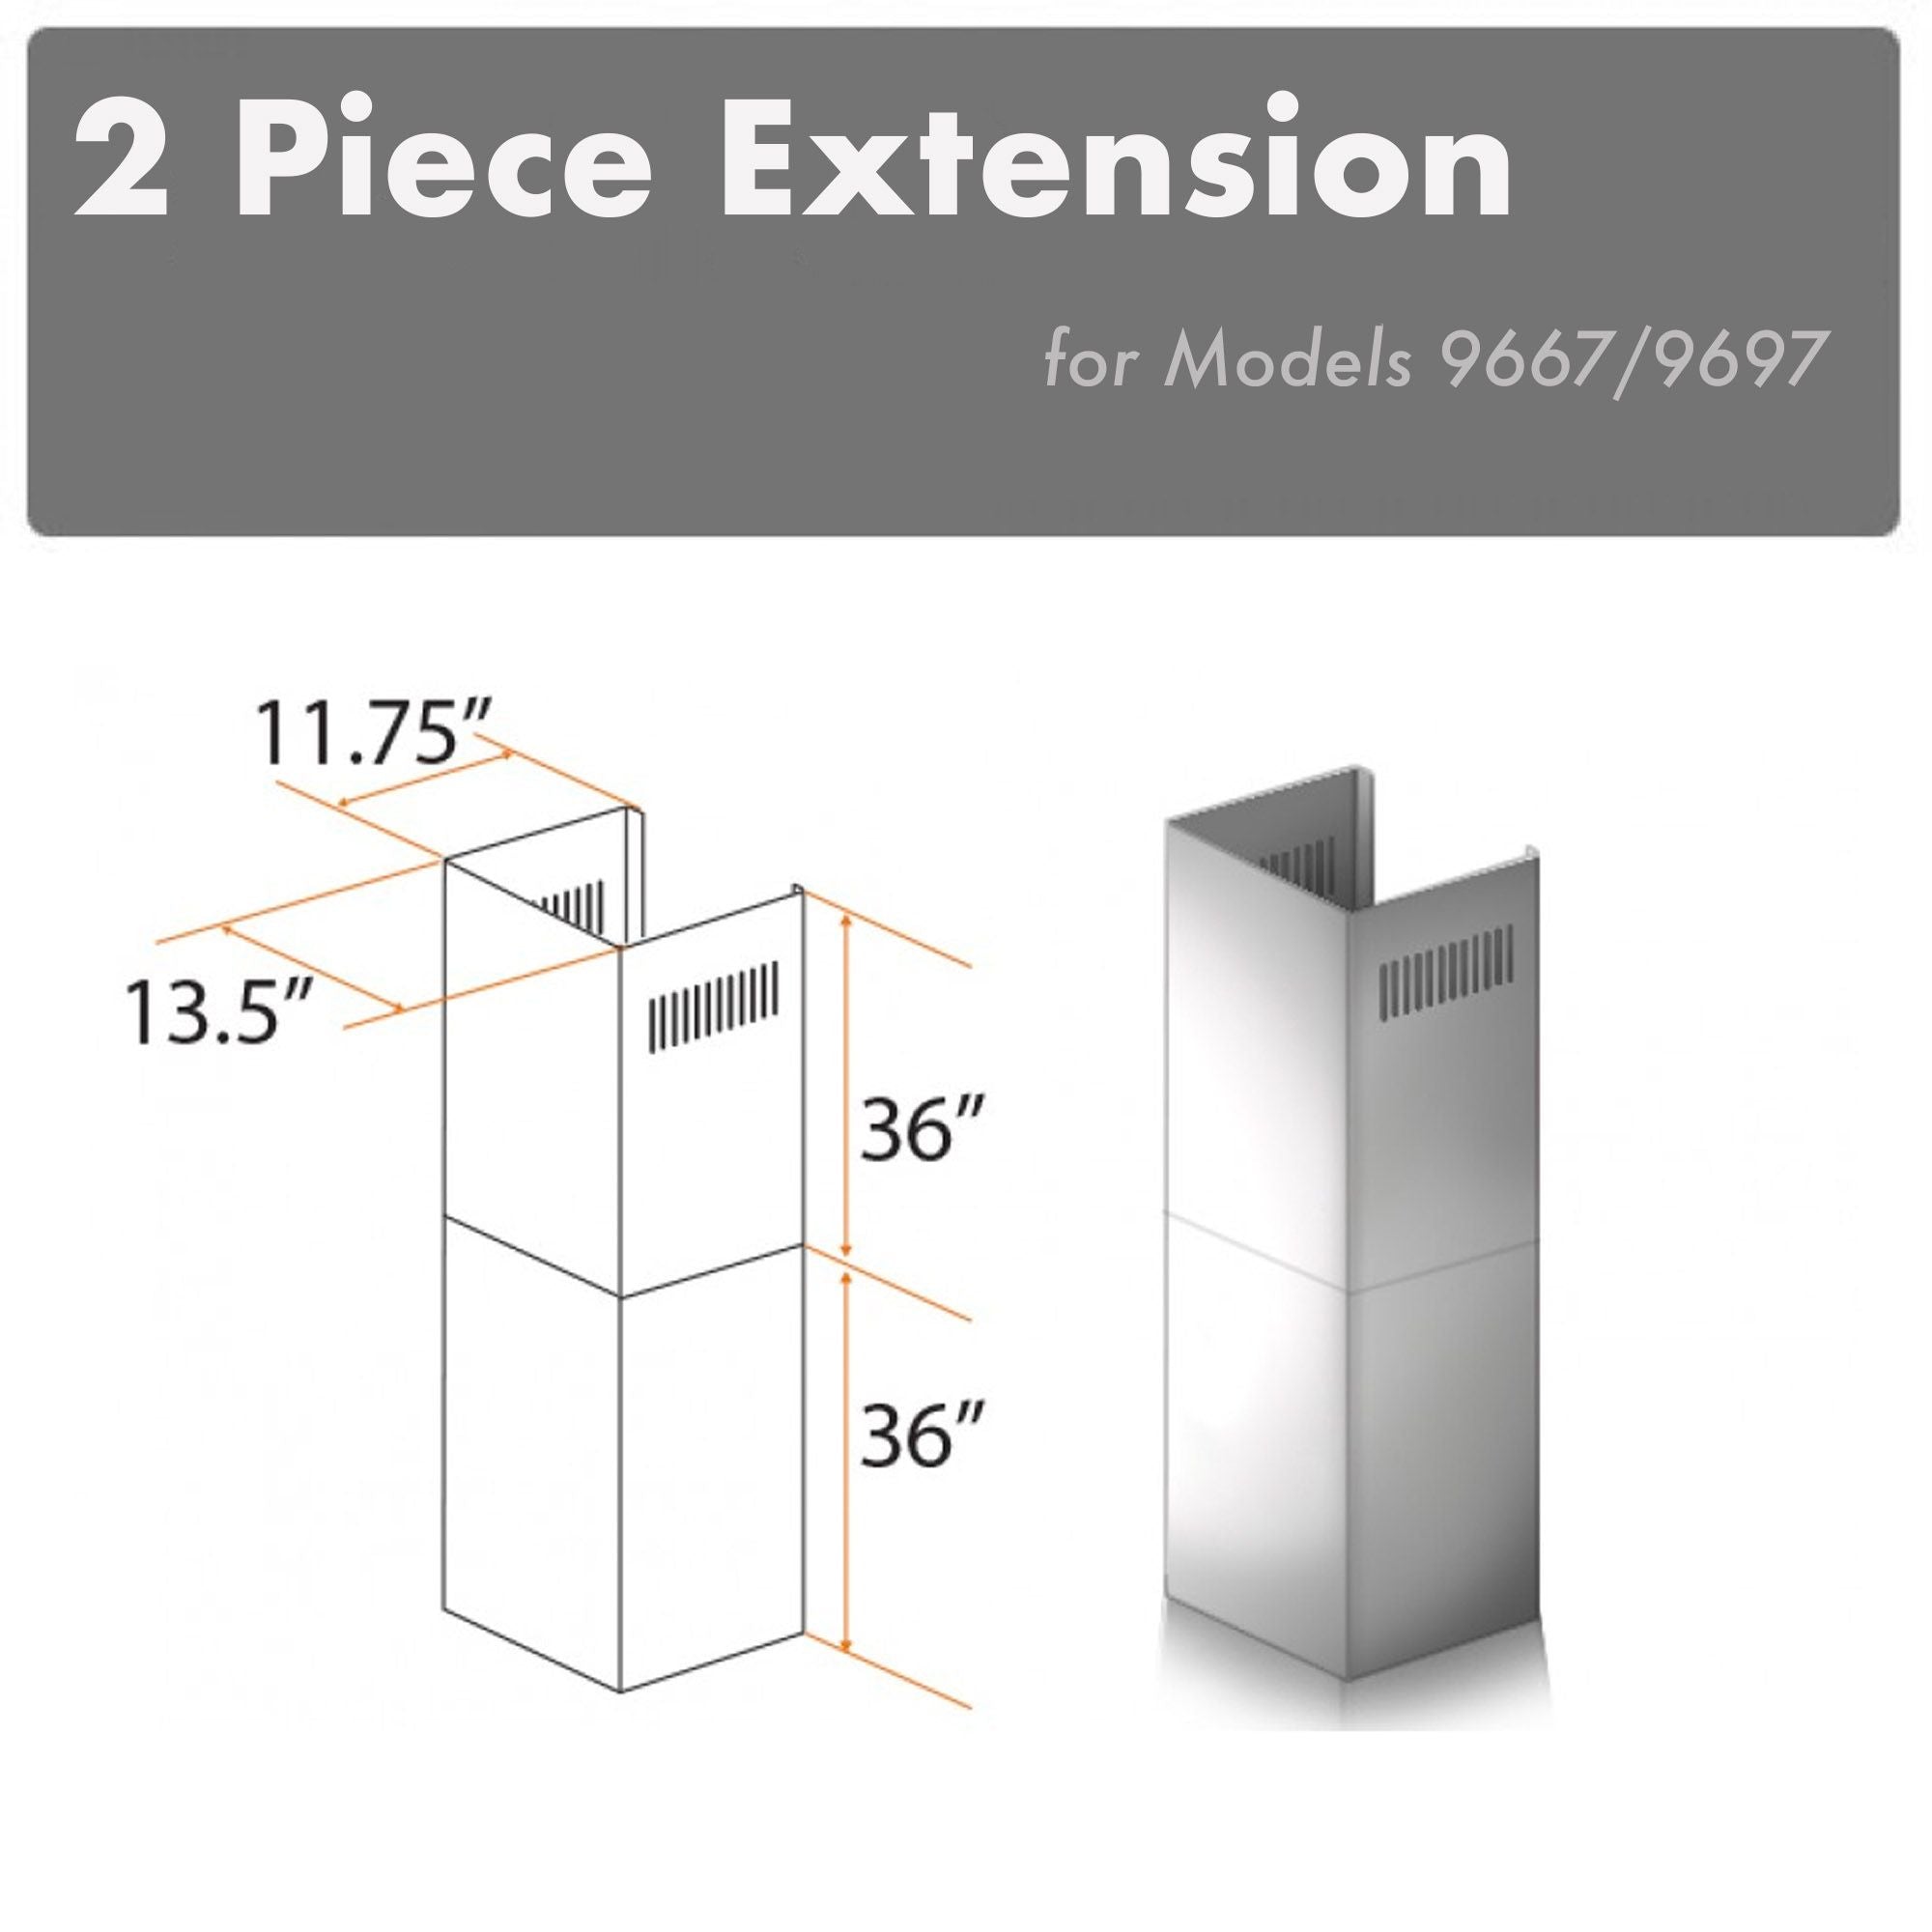 ZLINE 2-36" Chimney Extensions for 10 ft. to 12 ft. Ceilings (2PCEXT-9667/9697)